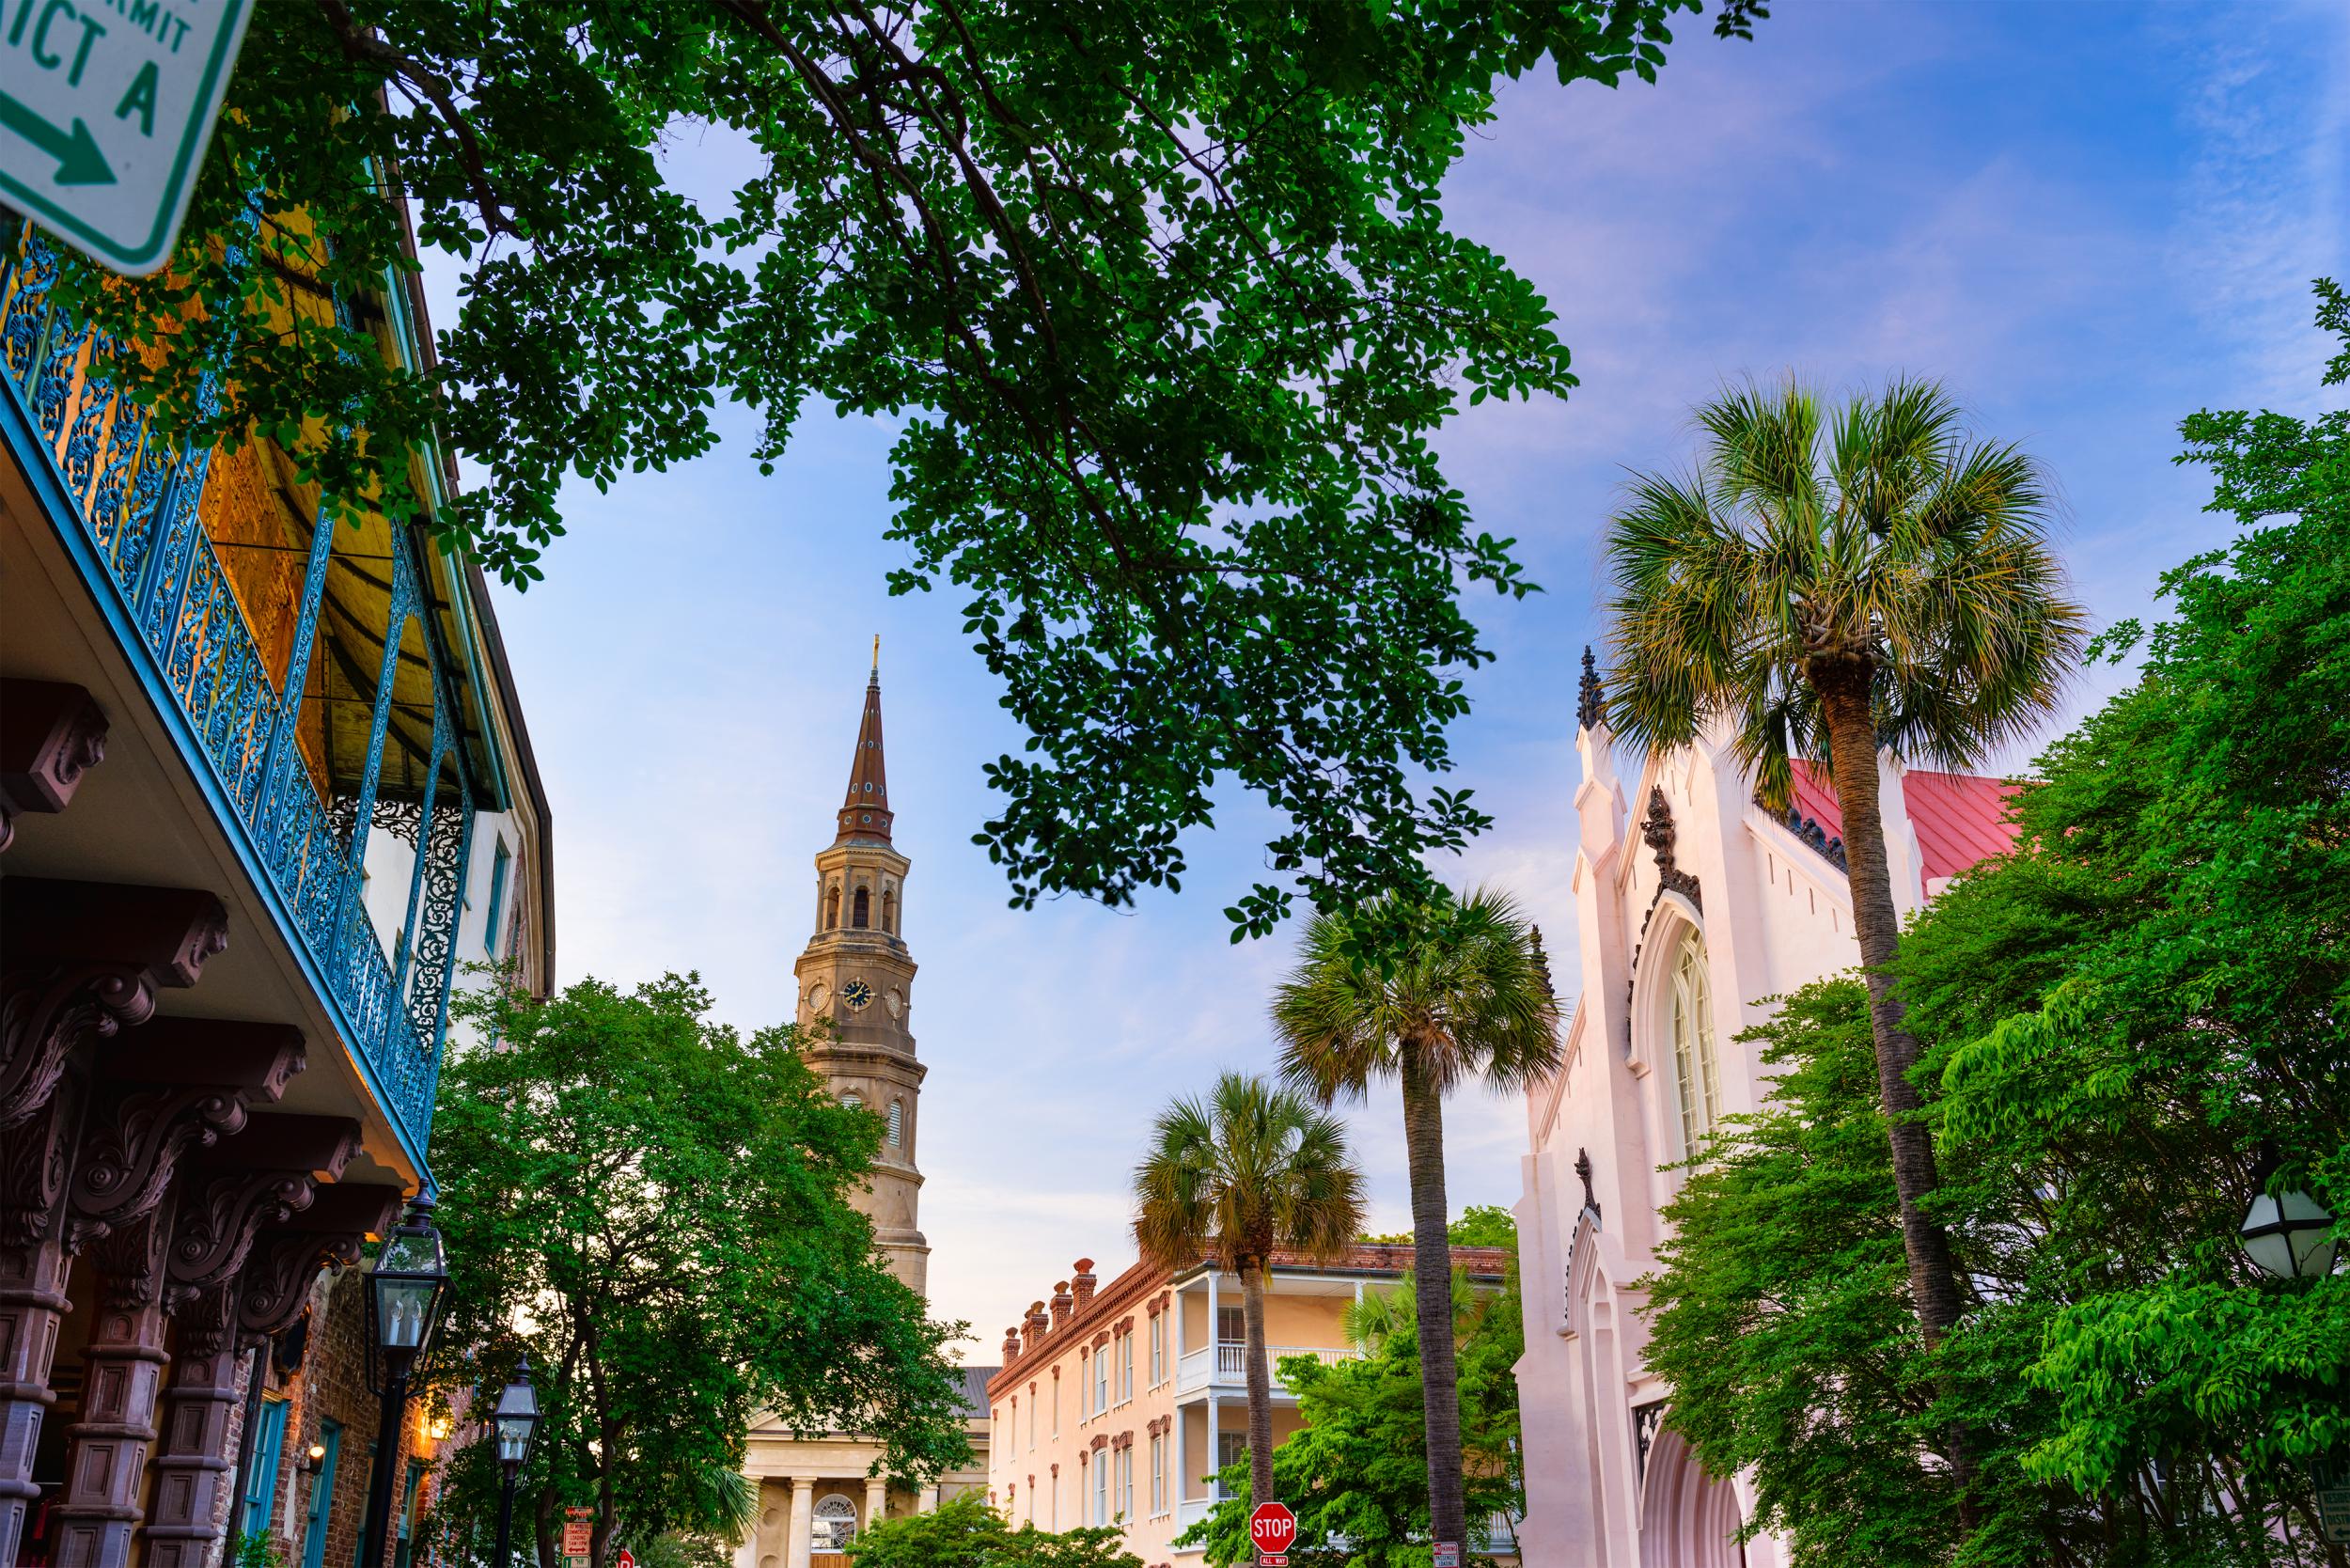 The heart of Charleston’s historic downtown core is entirely walkable